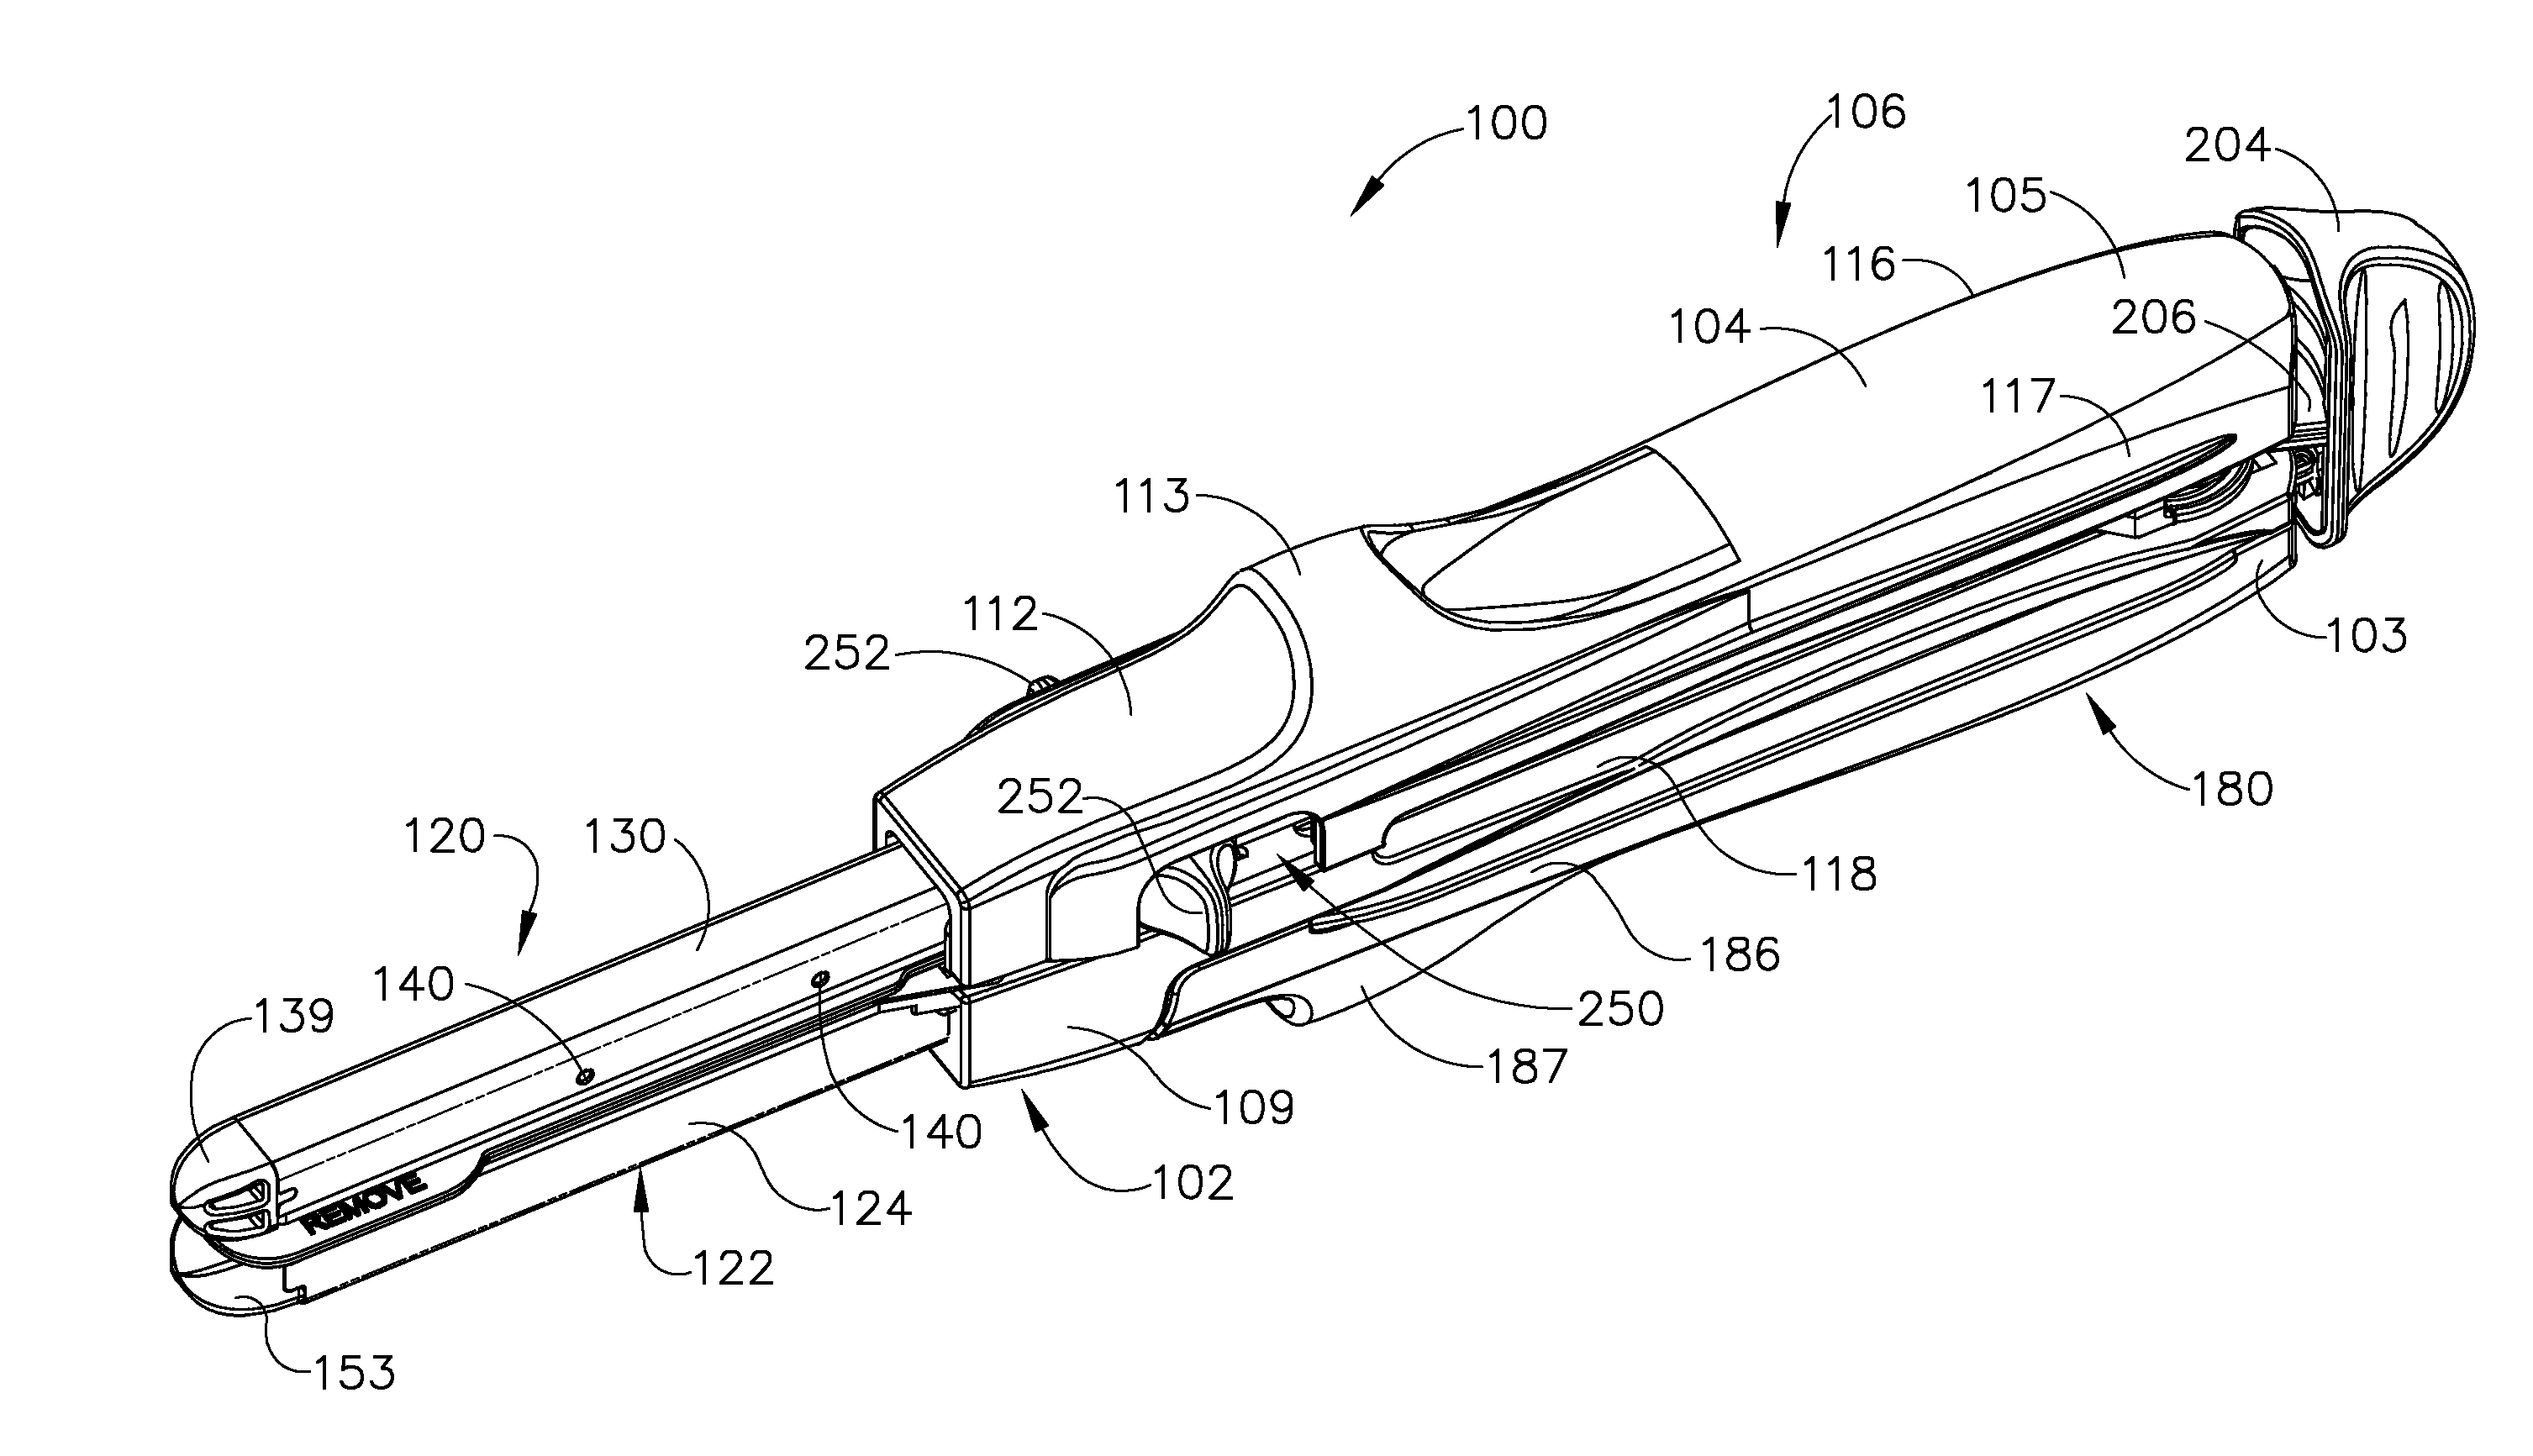 Surgical stapling instrument with cutting member arrangement